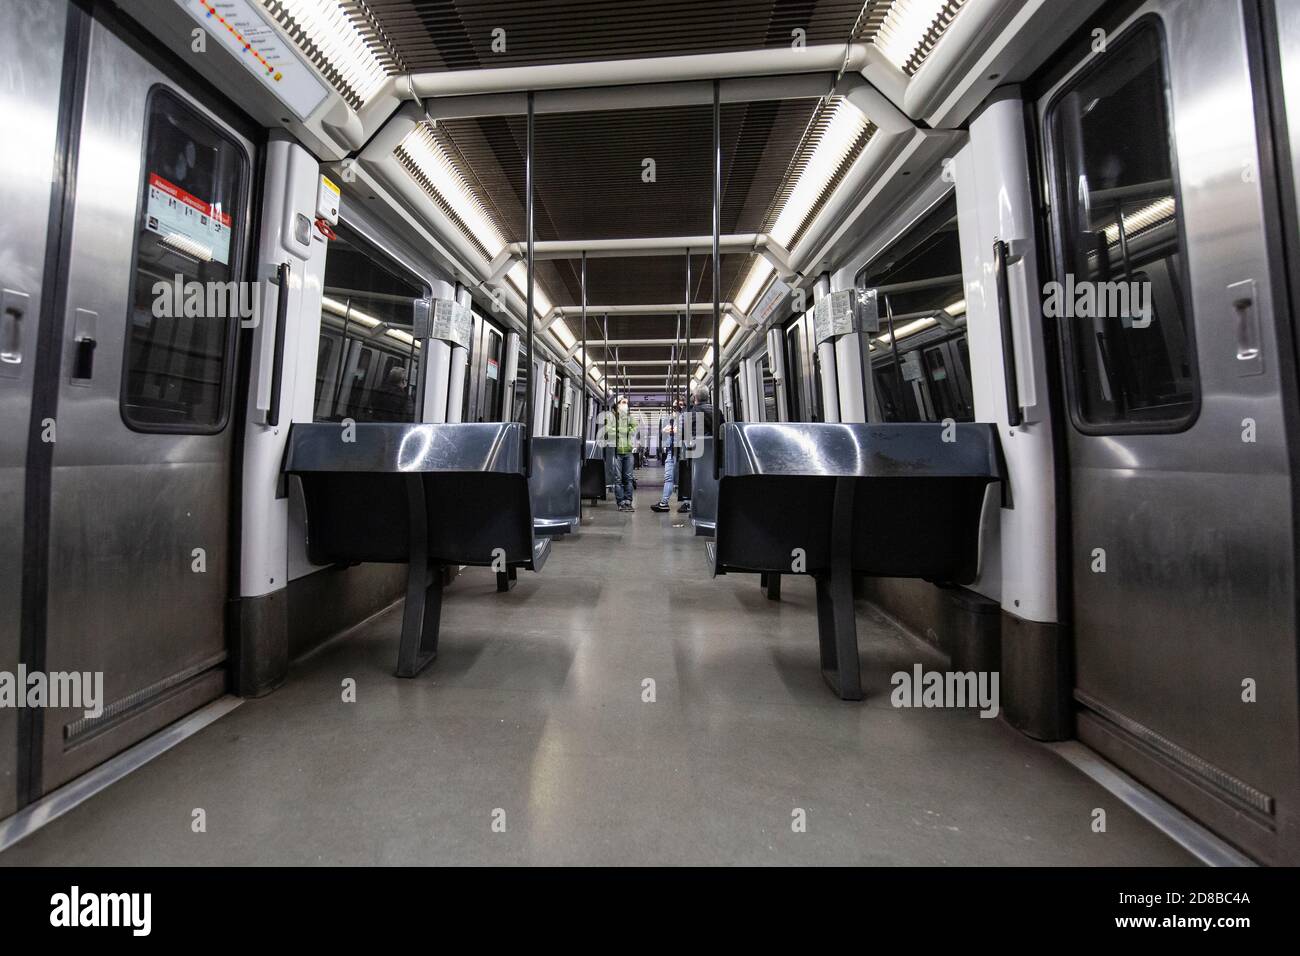 2020.10.28. Barcelona, Spain. 22:40 h. In an almost empty subway lane a few people travel during the first hours of that day's curfew. © Aitor Rodero. Stock Photo